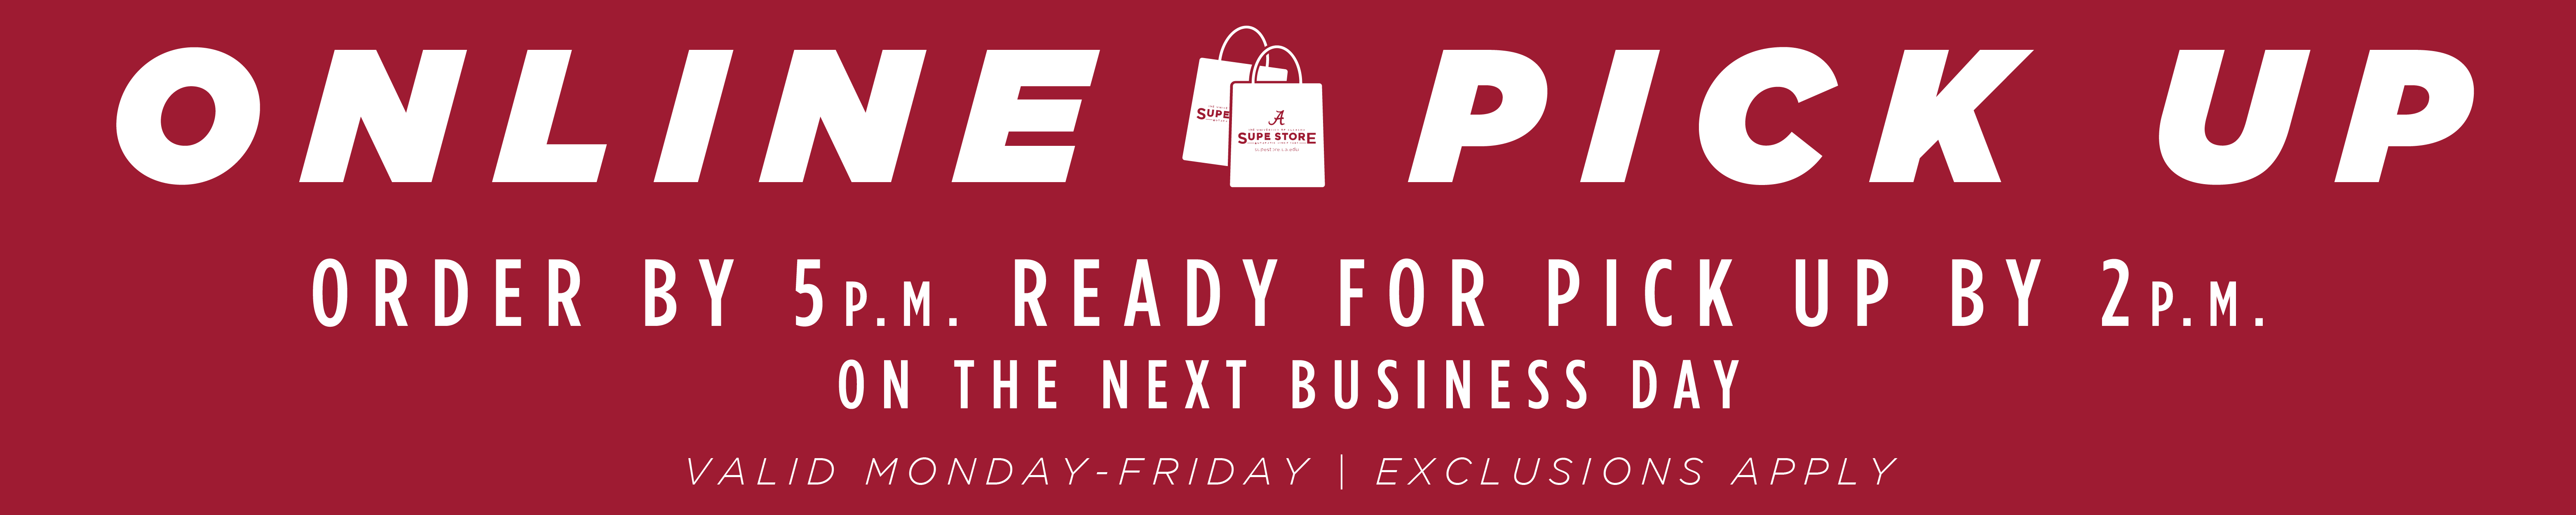 Order by 5pm, ready for pick up at 2pm the next business day.  Valid M-F, some exclusions apply